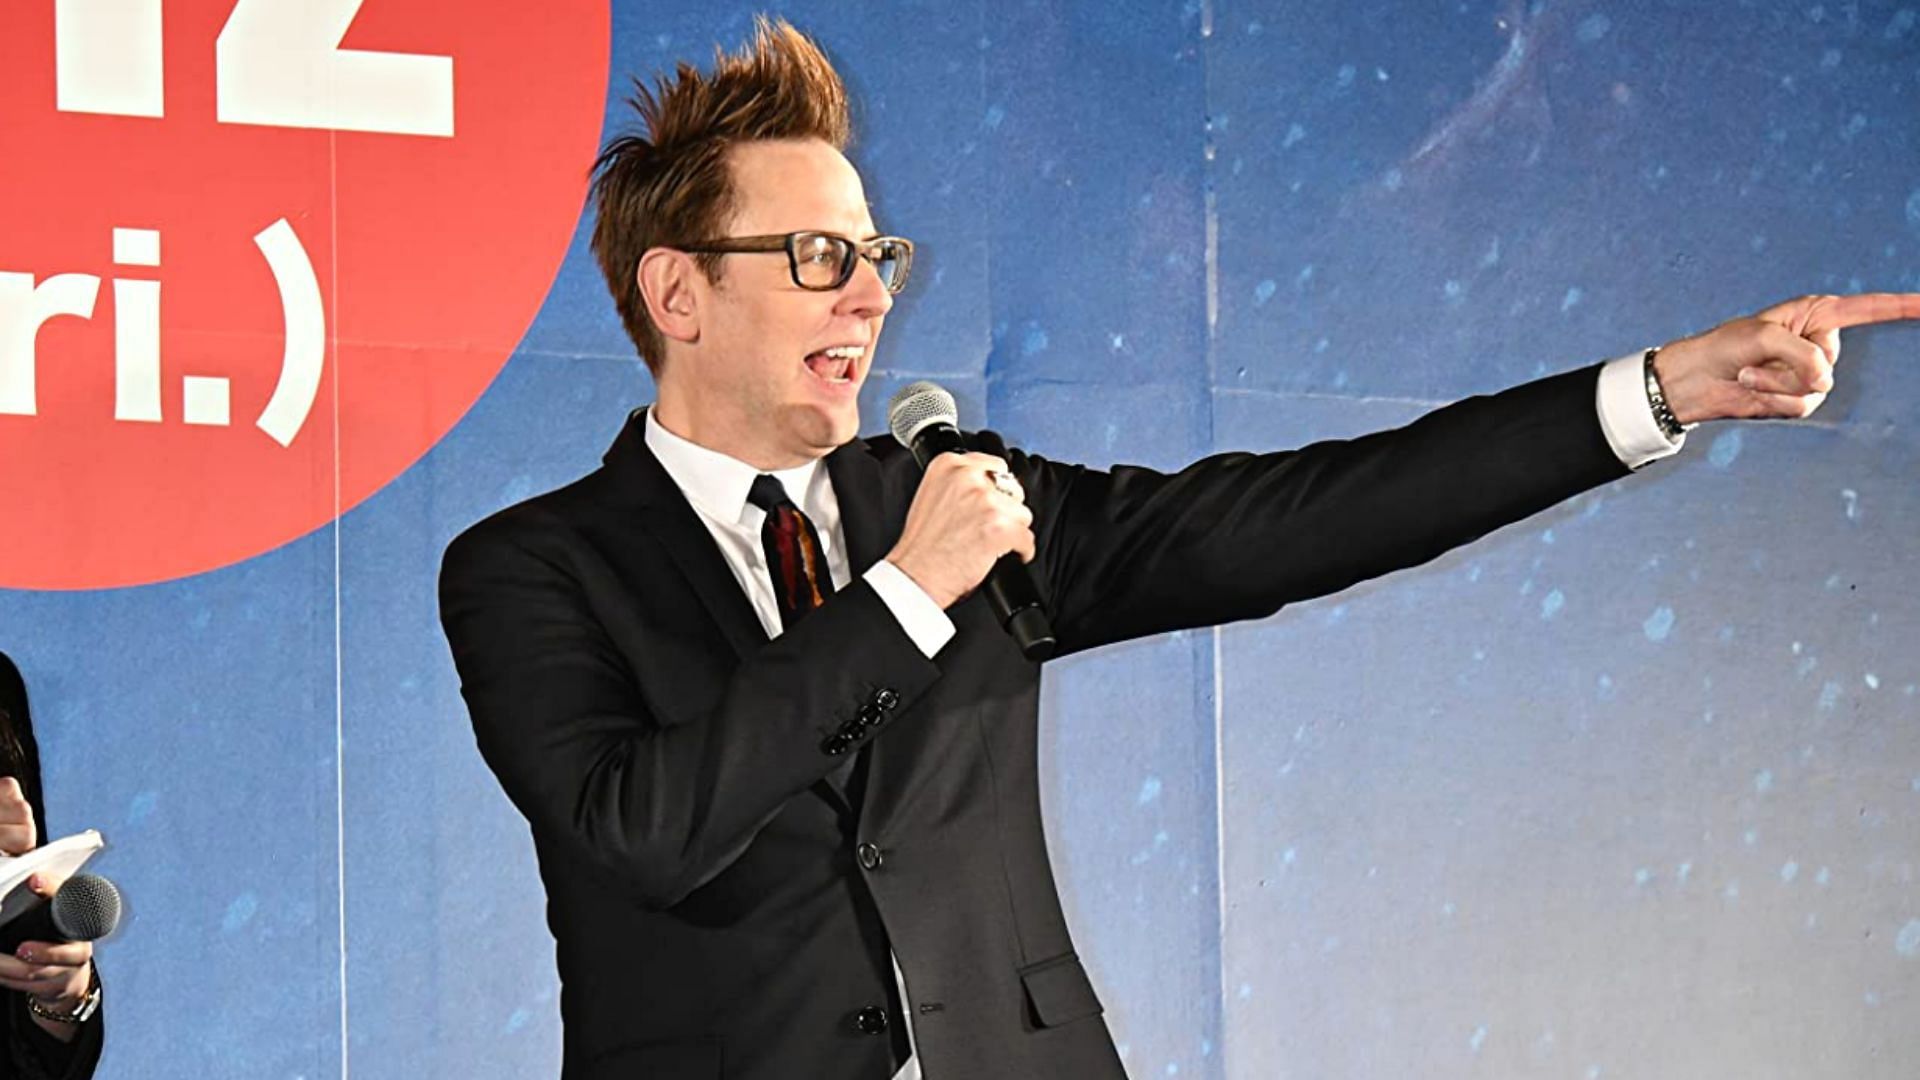 James Gunn at an event for Guardians of the Galaxy Vol. 2 (Image via IMDb)